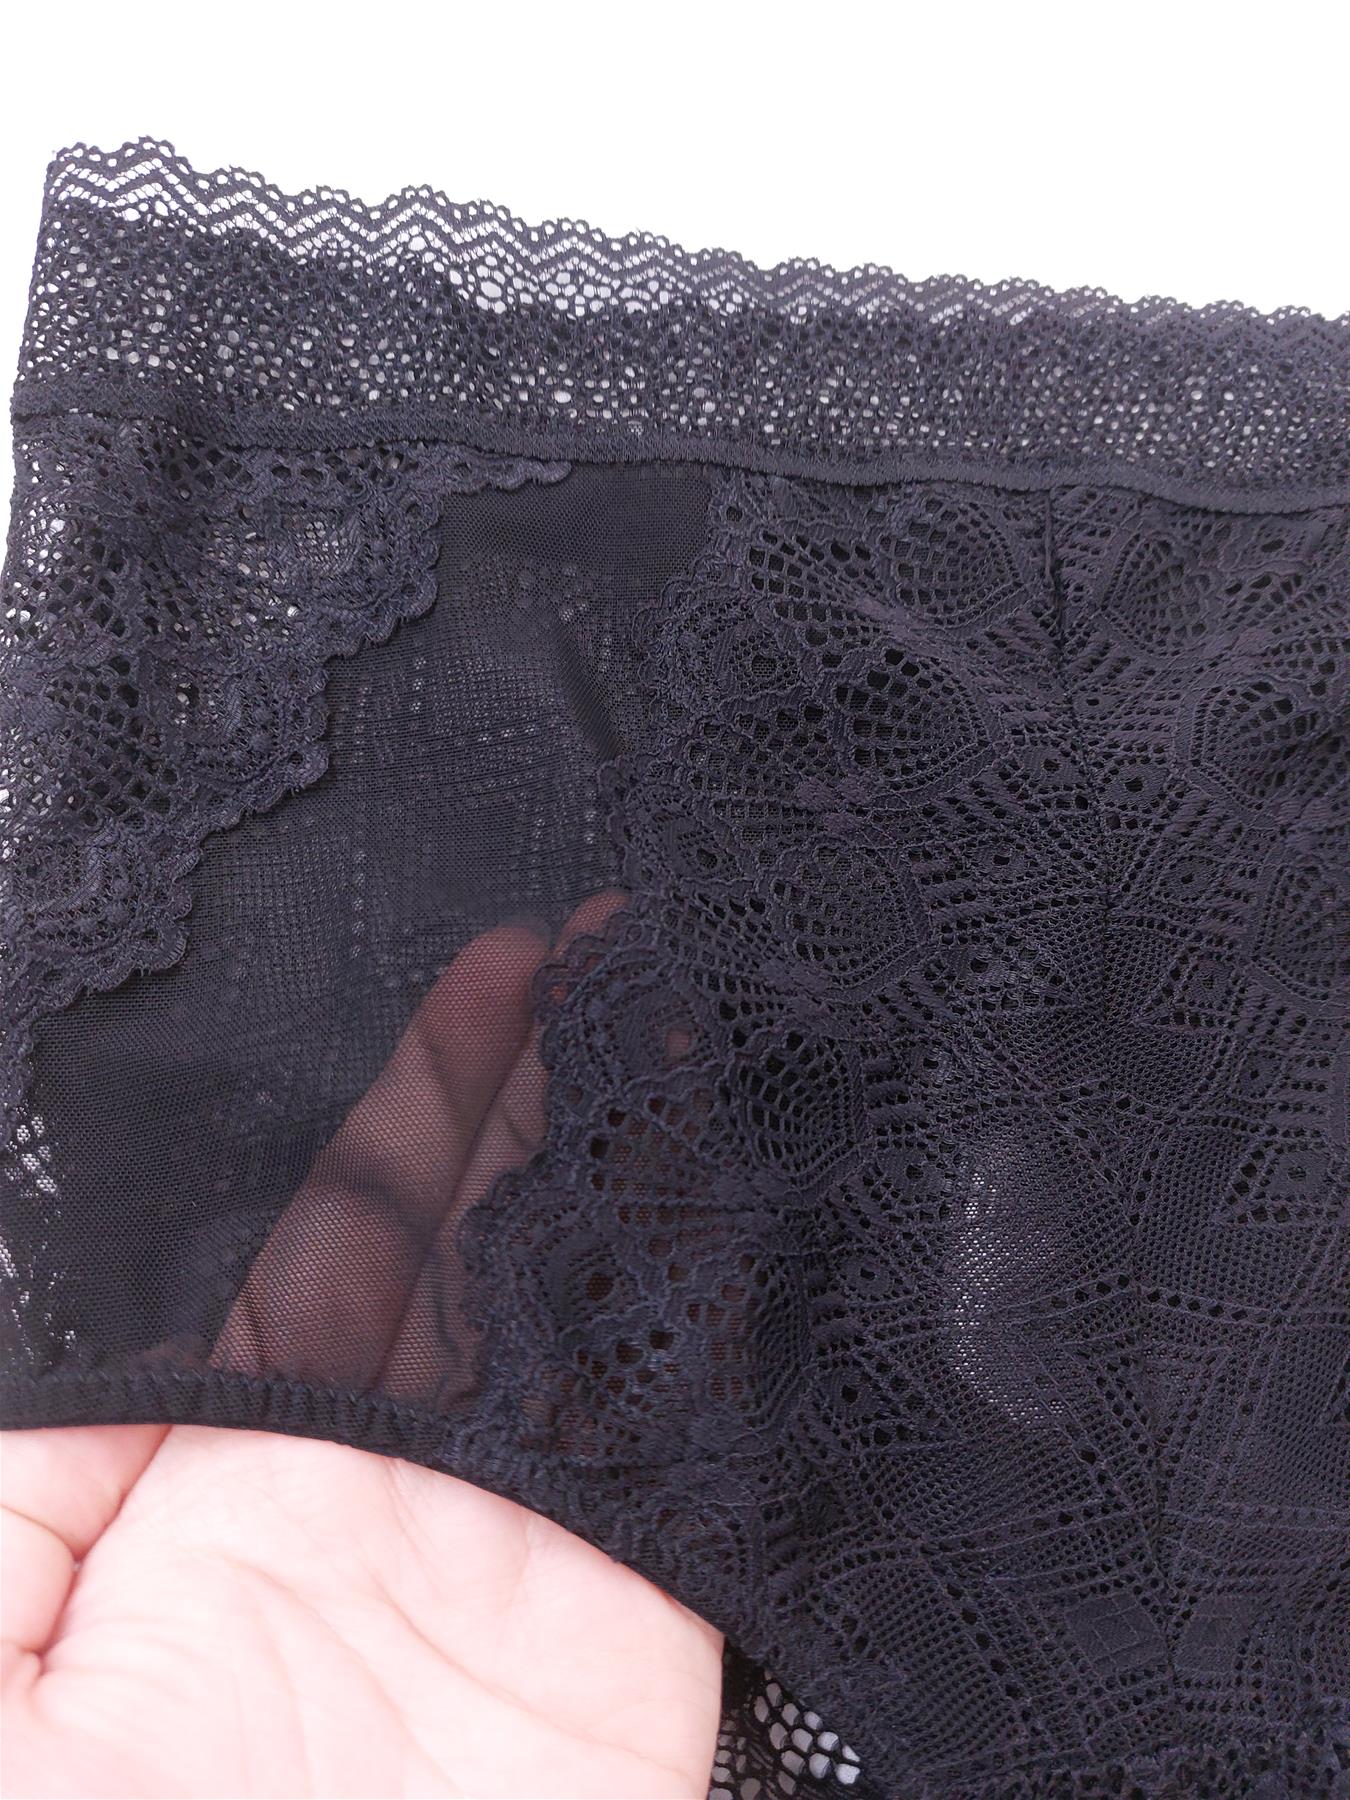 Oysho High Waist Knickers Full Brief Art Deco Lace Cotton Lined Black Size M